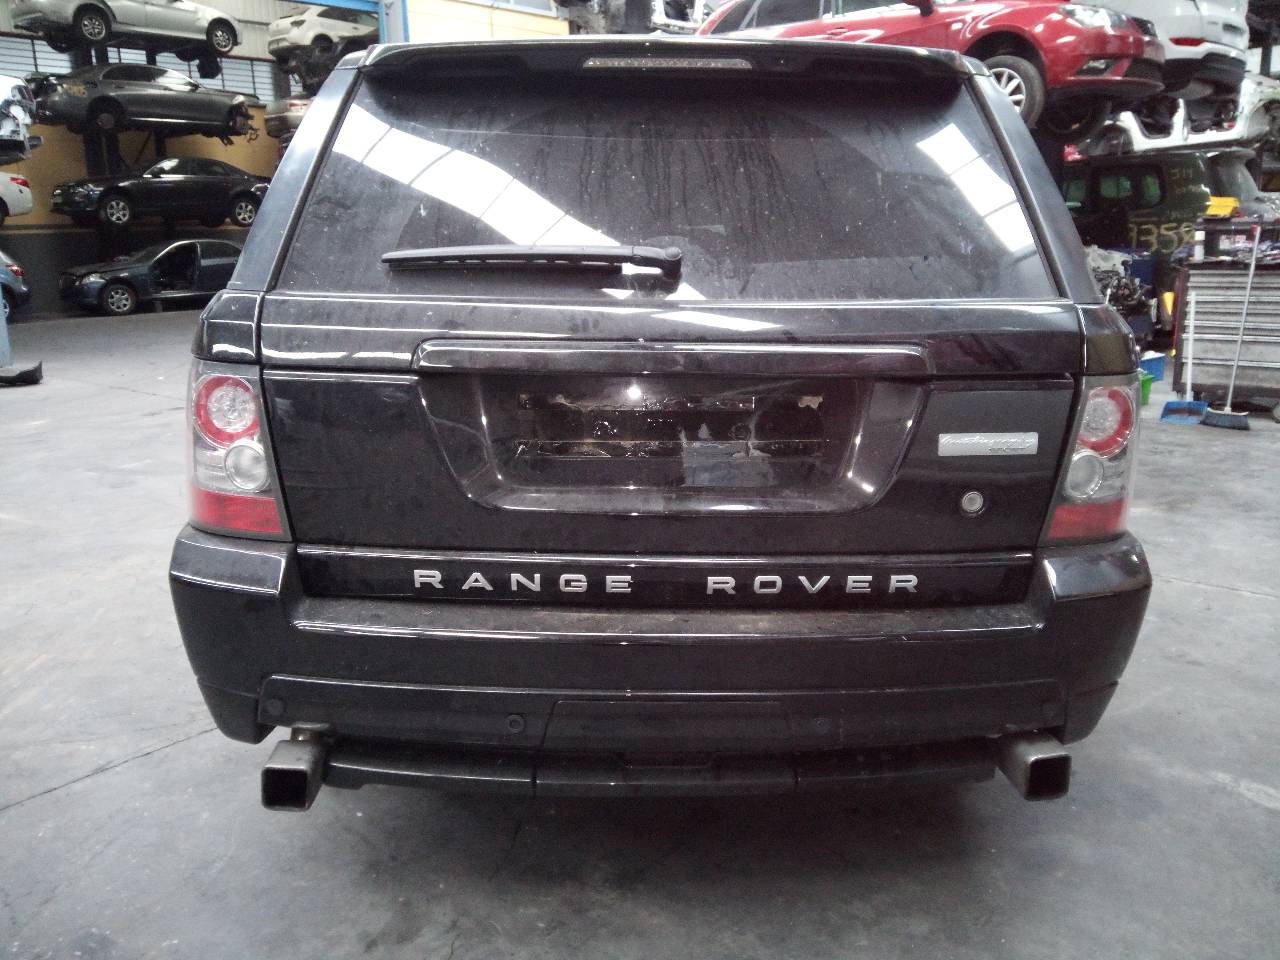 LAND ROVER Range Rover Sport 1 generation (2005-2013) Other Control Units AH427H417AE, 0260140019, E3-B3-8-2 18752971